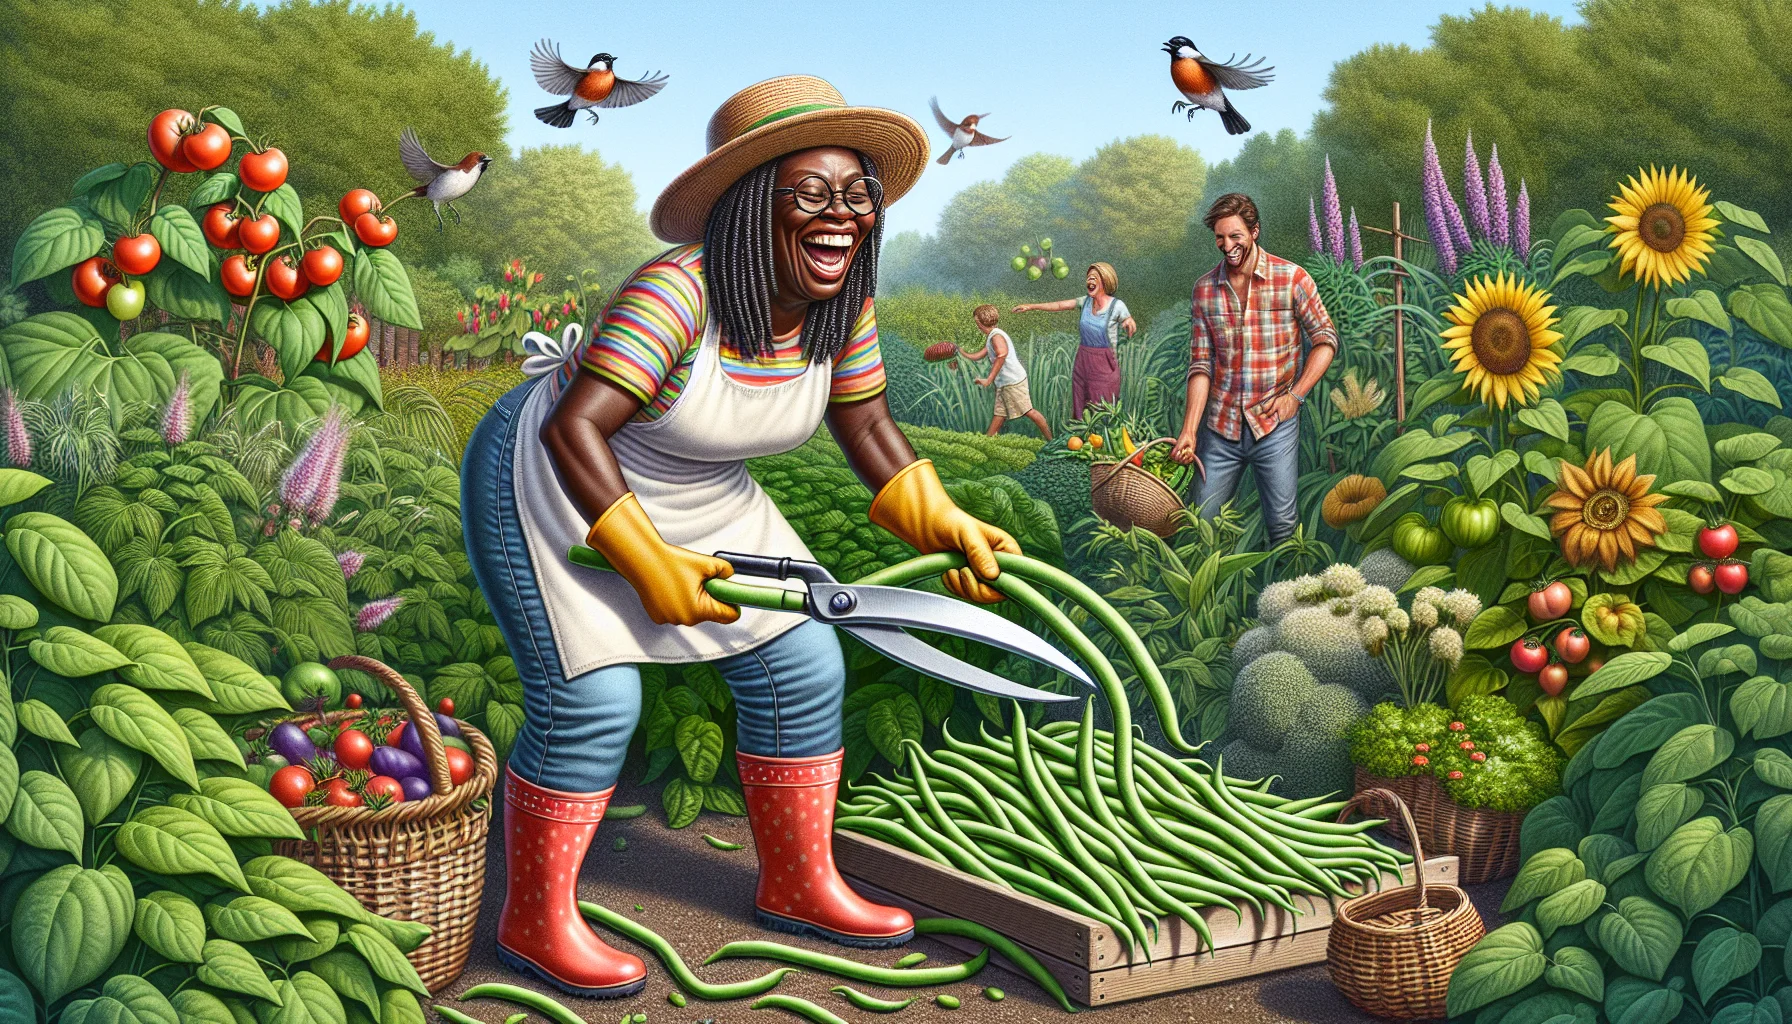 Let's bring some humor into gardening. Picture a detailed and realistic image of an outdoor scene. In the heart of this scene is a Black woman, full of laughter, demonstrating how to cut green beans. She's dressed in a colorful gardener's outfit, complete with gloves, a straw hat, and rubber boots. The green beans are exaggeratedly large, like the size of her forearm, giving the scene a whimsical feel. The garden around her is lush, with all varieties of plants - from tall sunflowers to ripe tomatoes. Feathered companions - red robins and sparrows, add to the cheerful atmosphere.